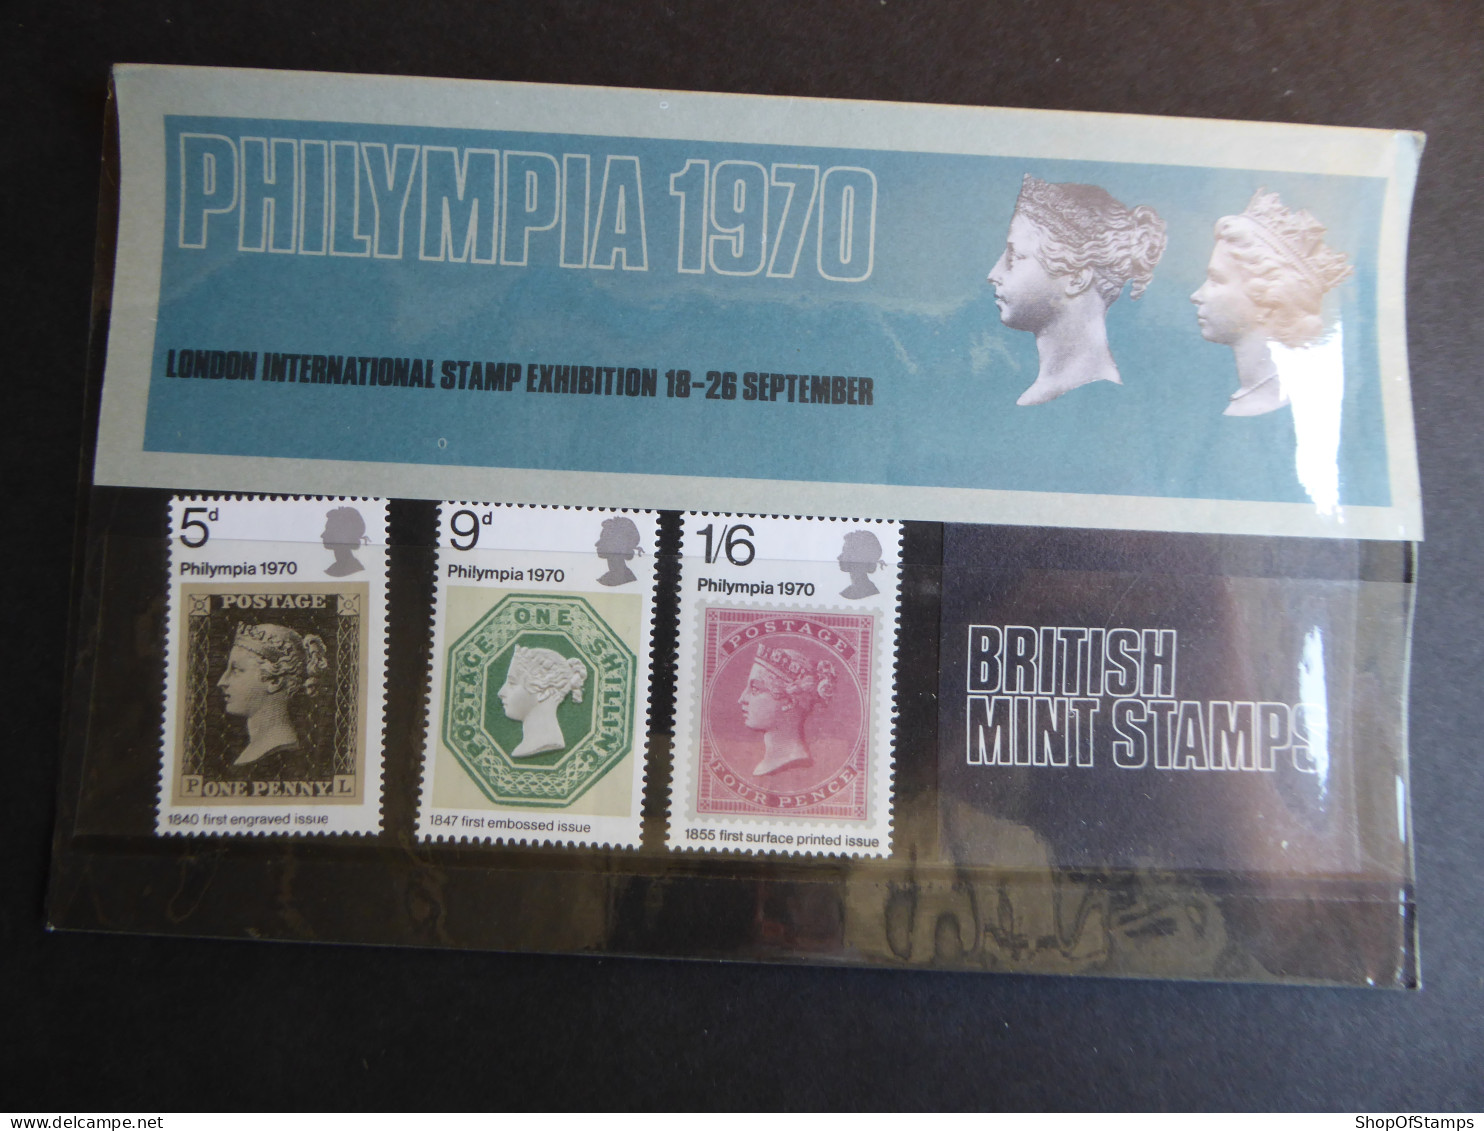 GREAT BRITAIN SG 835-37 PHILYMPIA 70 STAMP EXHIBITION PRESENTATION PACK - Feuilles, Planches  Et Multiples